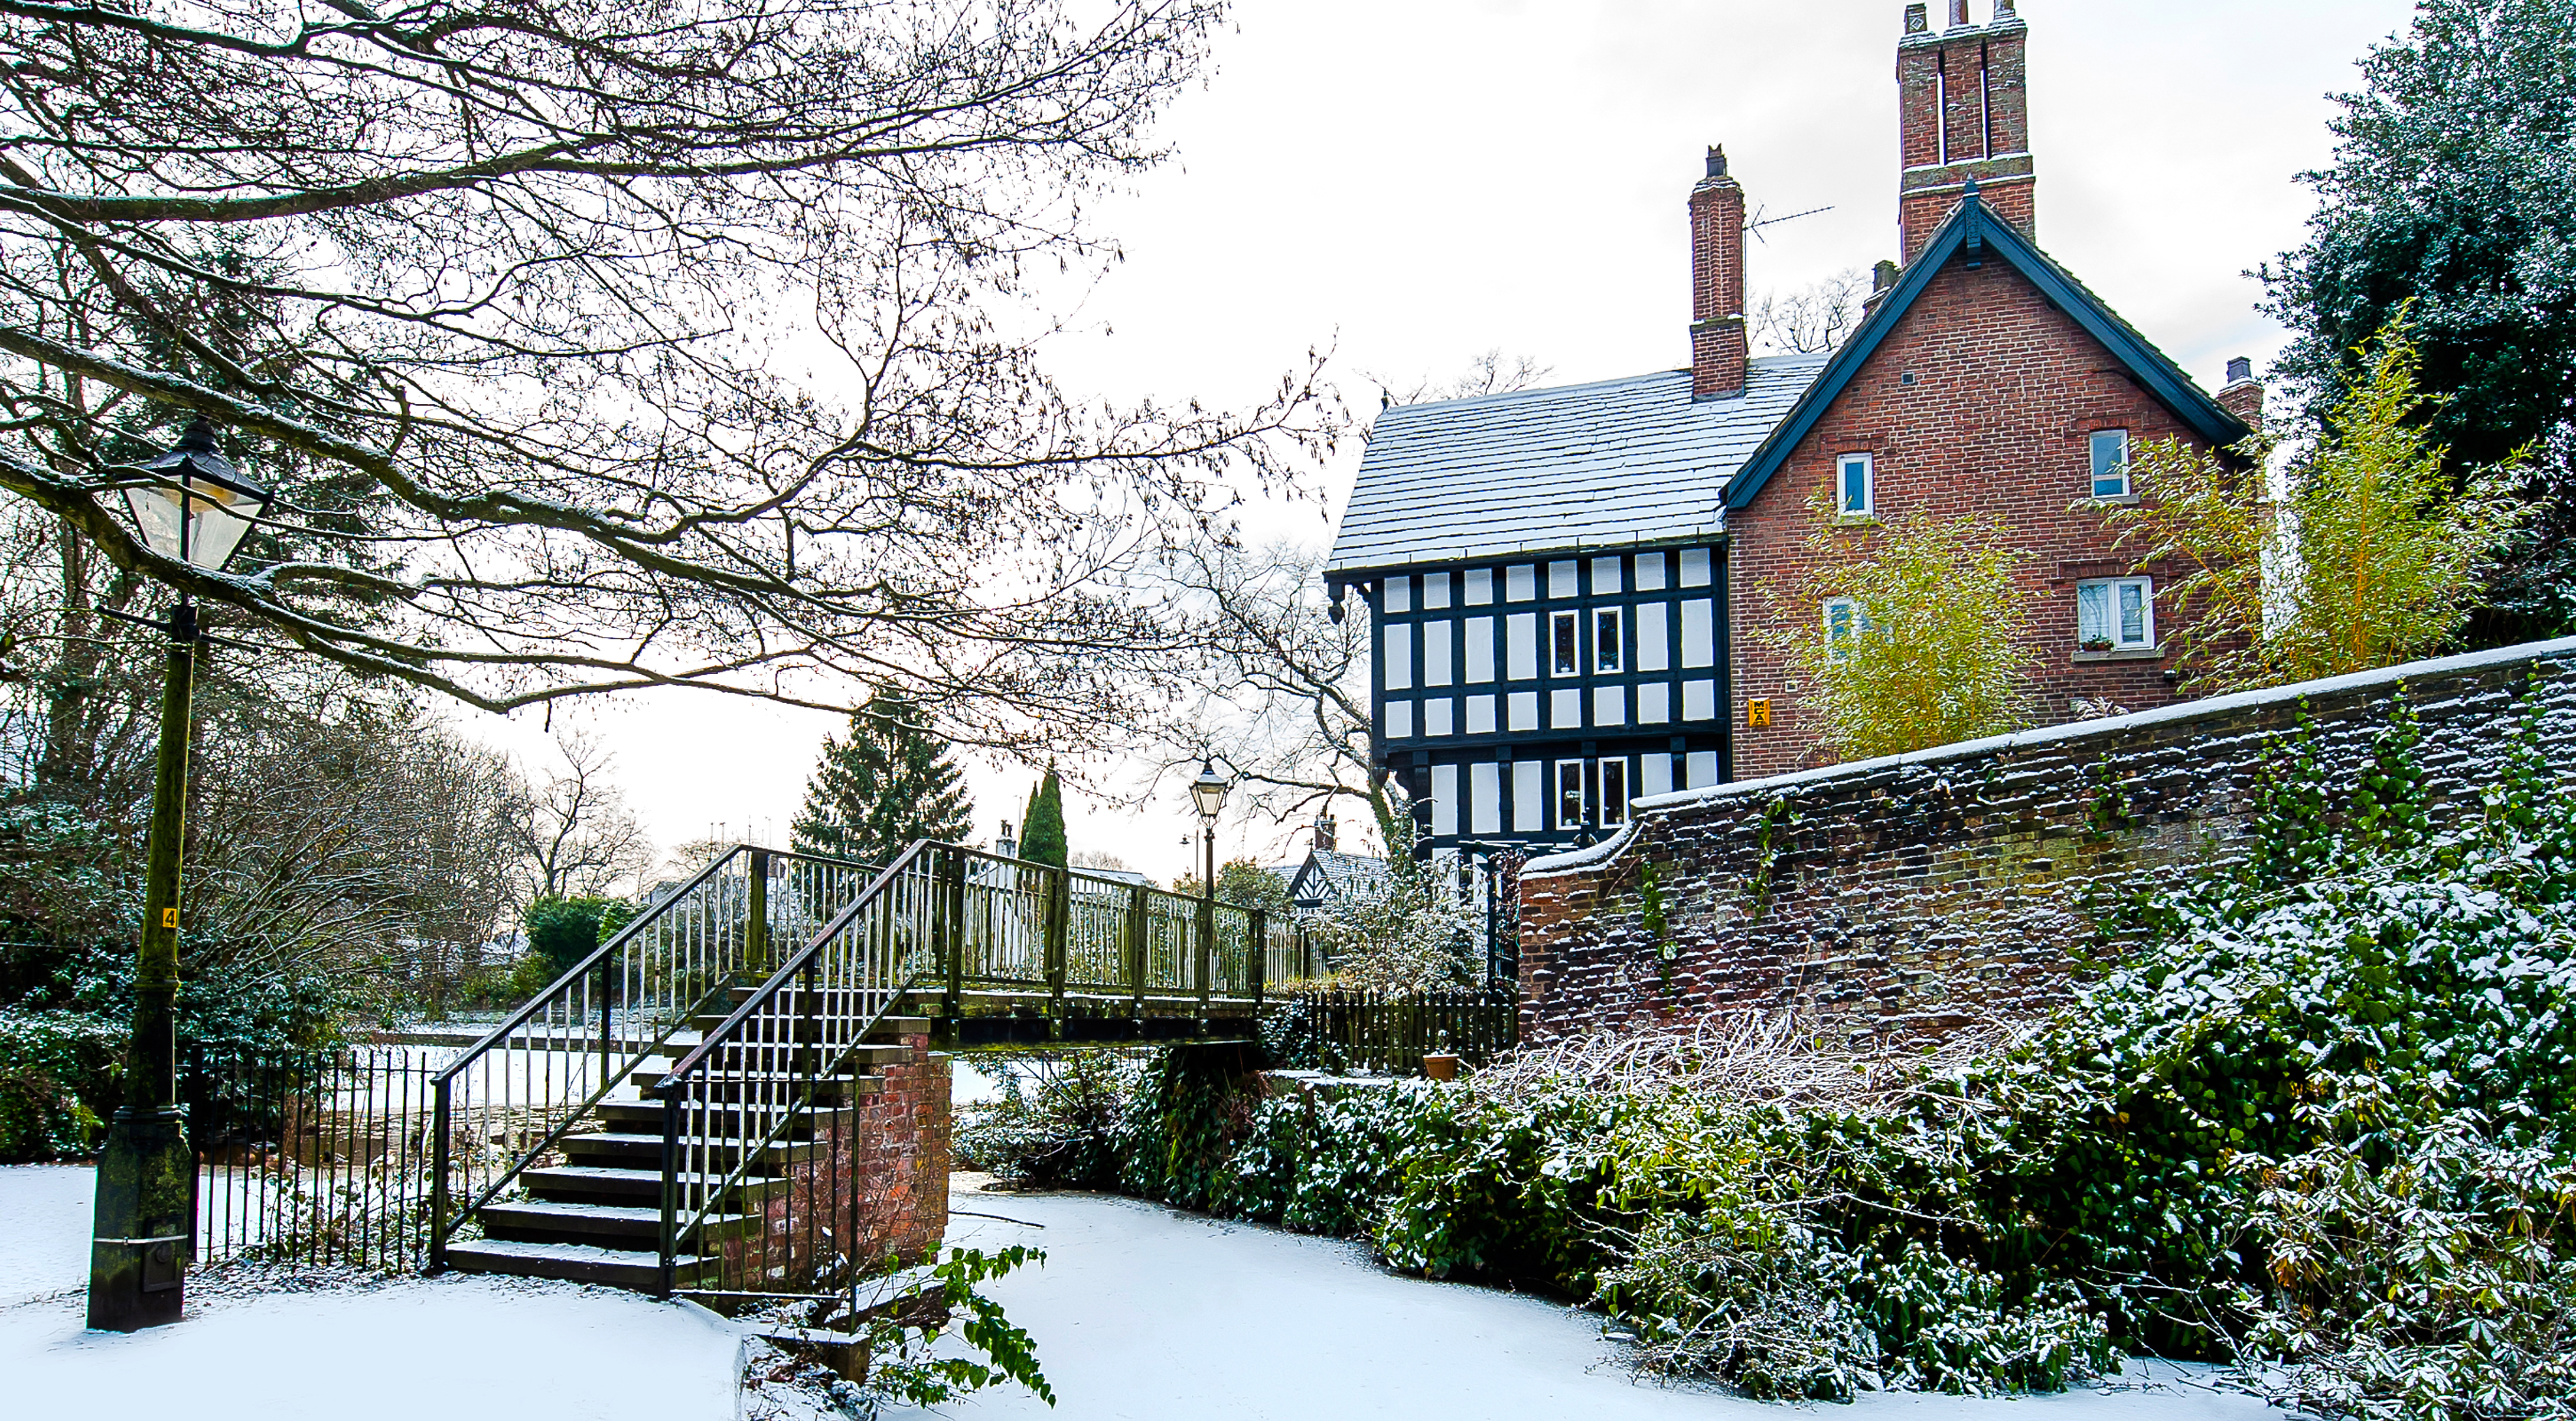 Worsley covered in snow